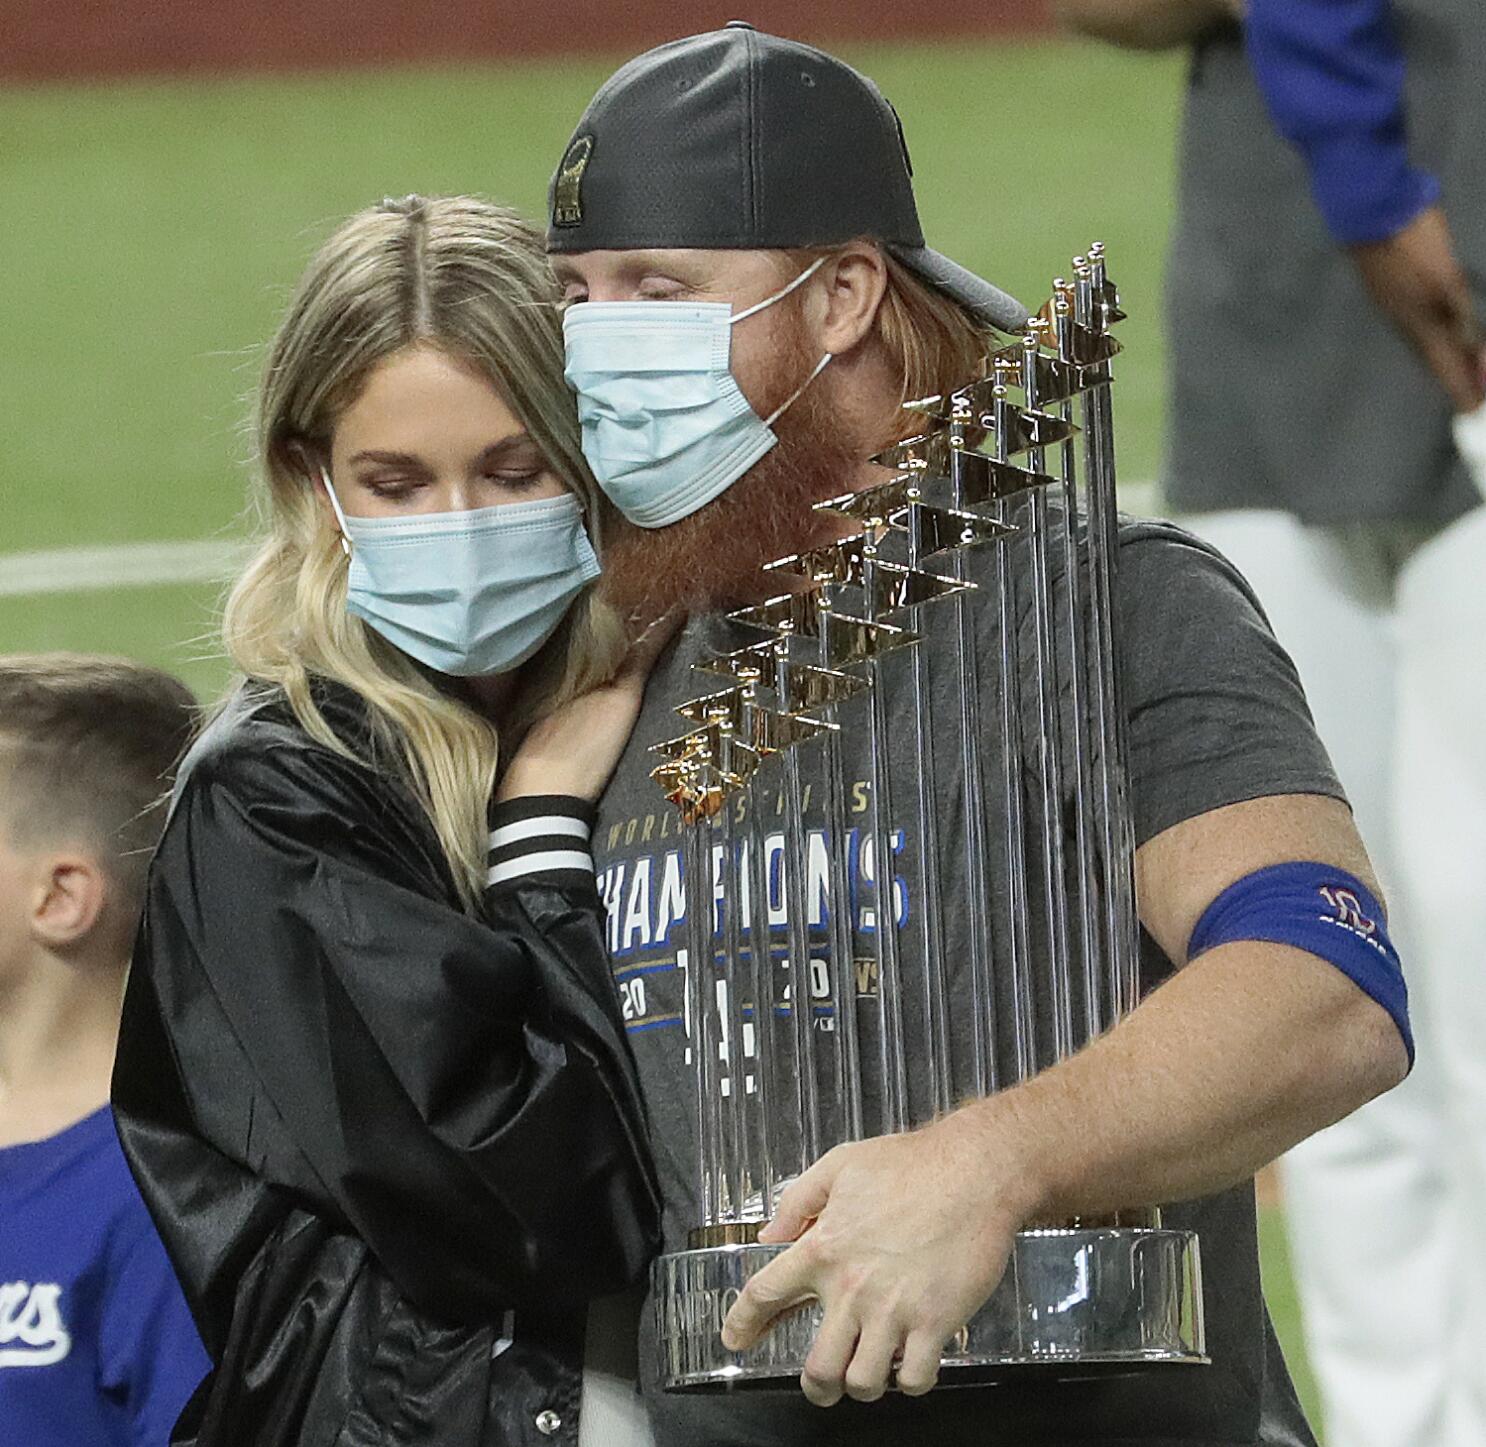 Dodgers' World Series win marred by Justin Turner's return to celebrate